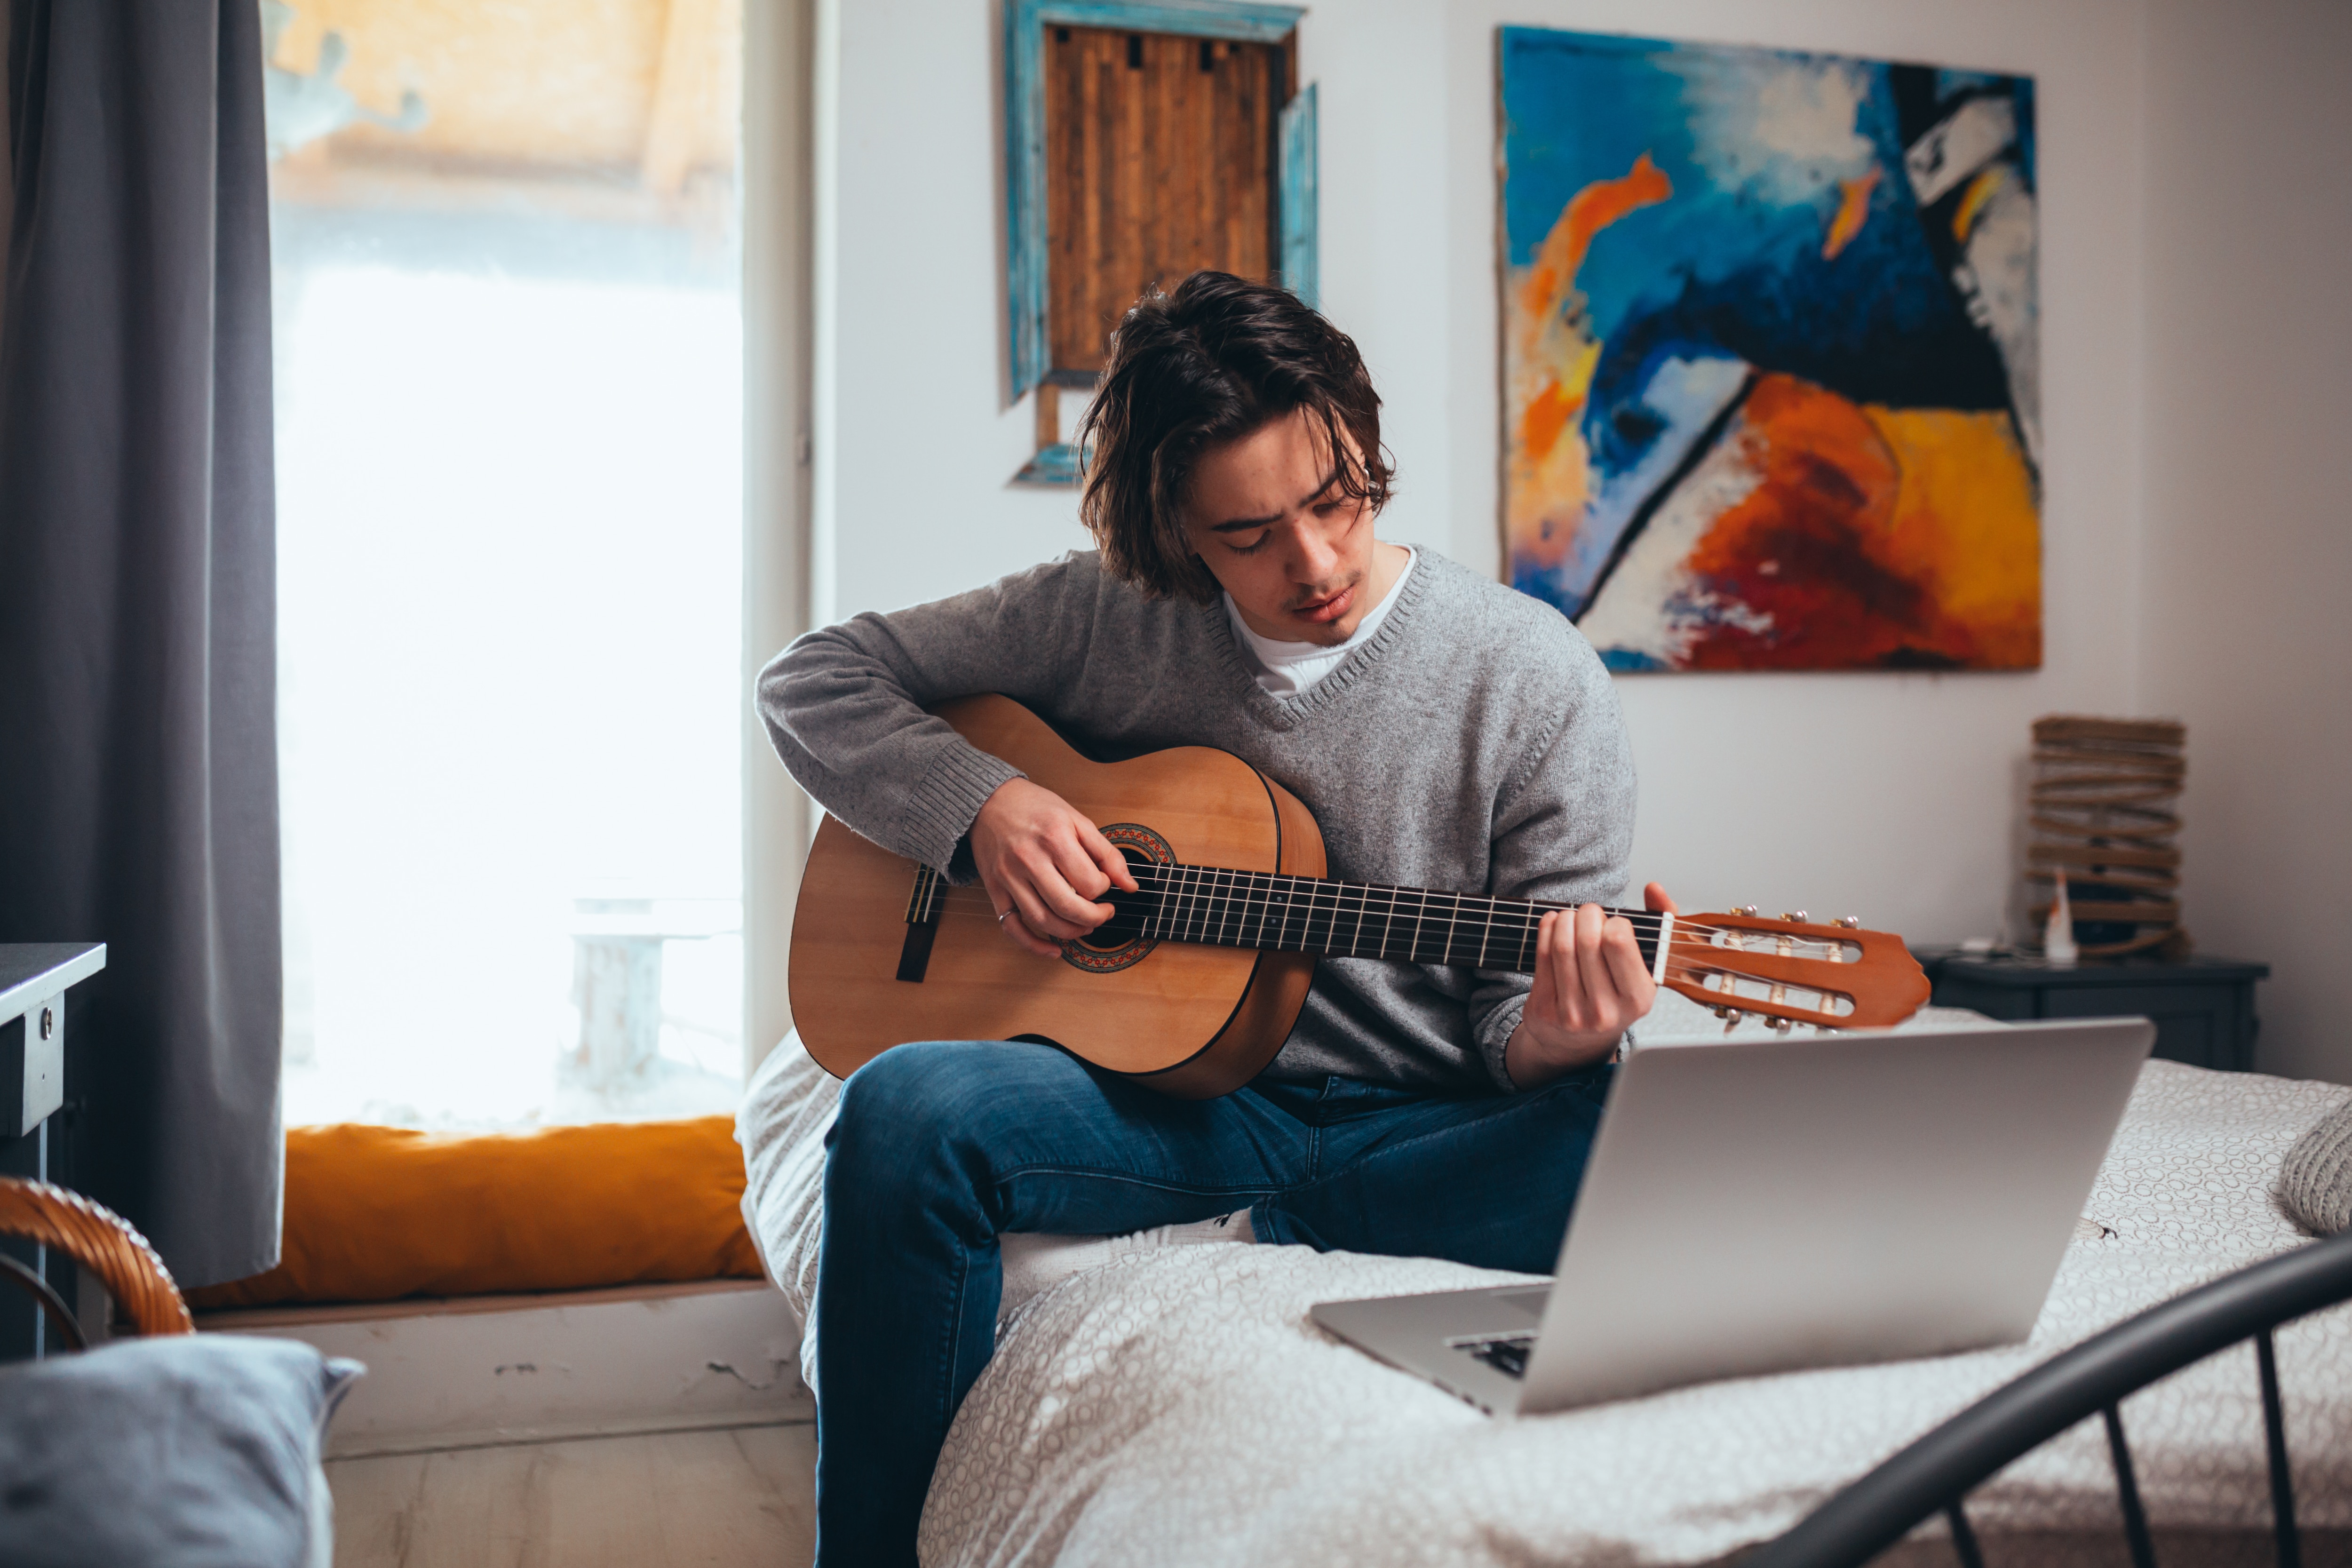 [RS+] How Long Does It Take To Learn Guitar SEO ARTICLE - What Factors Affect Your Guitar Progress?